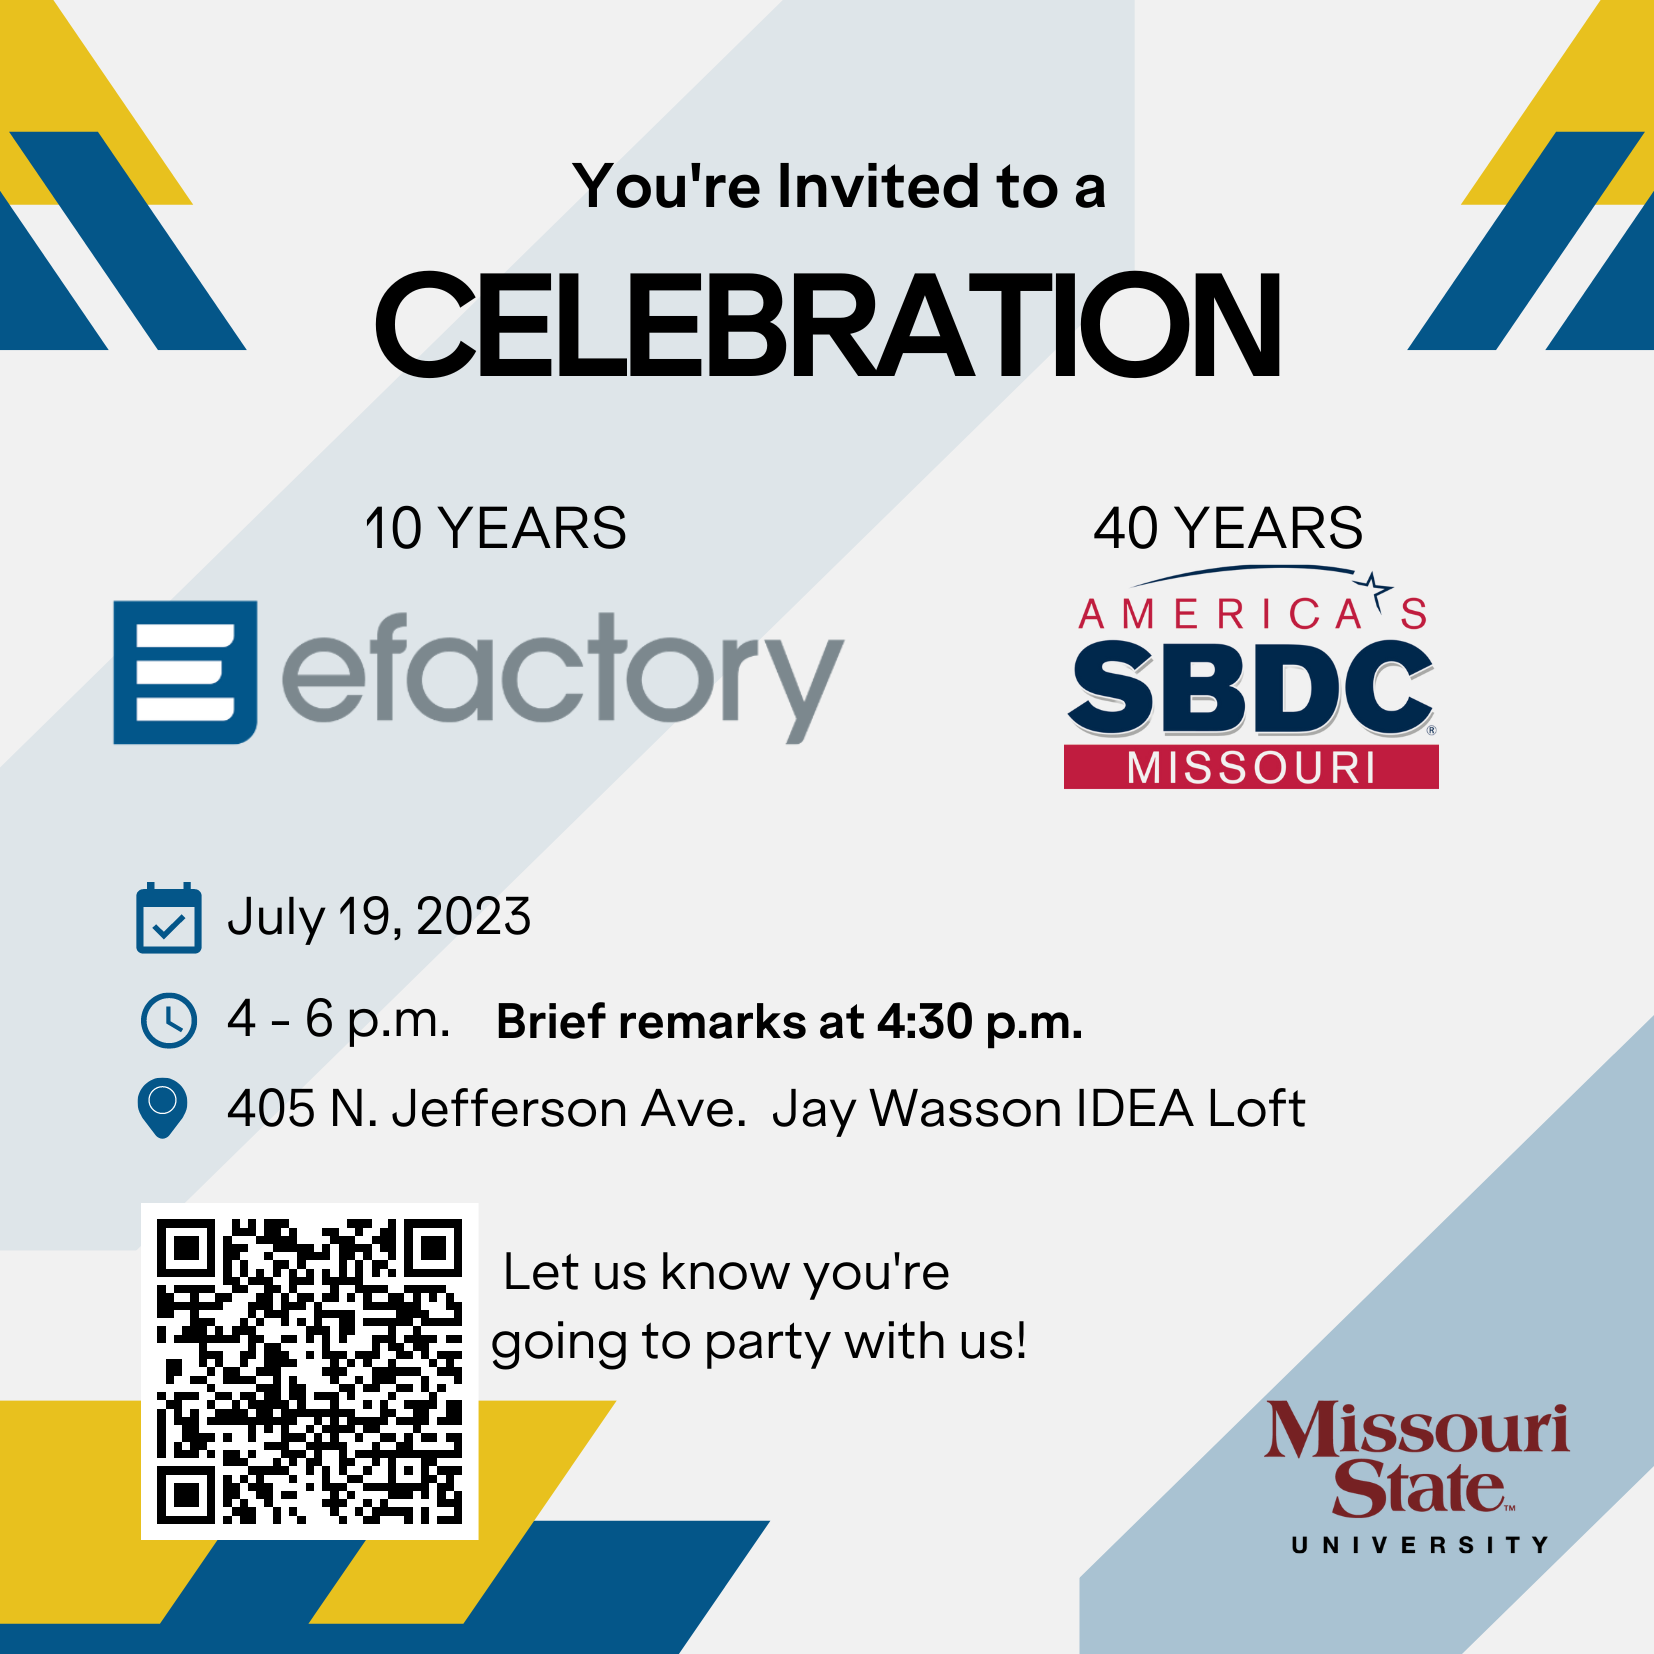 You're invited to a celebration - 10 years of efactory and 40 years of MO SBDC at MSU. Join us July 19 from 4-6 p.m. at the IDEA Loft. RSVP.